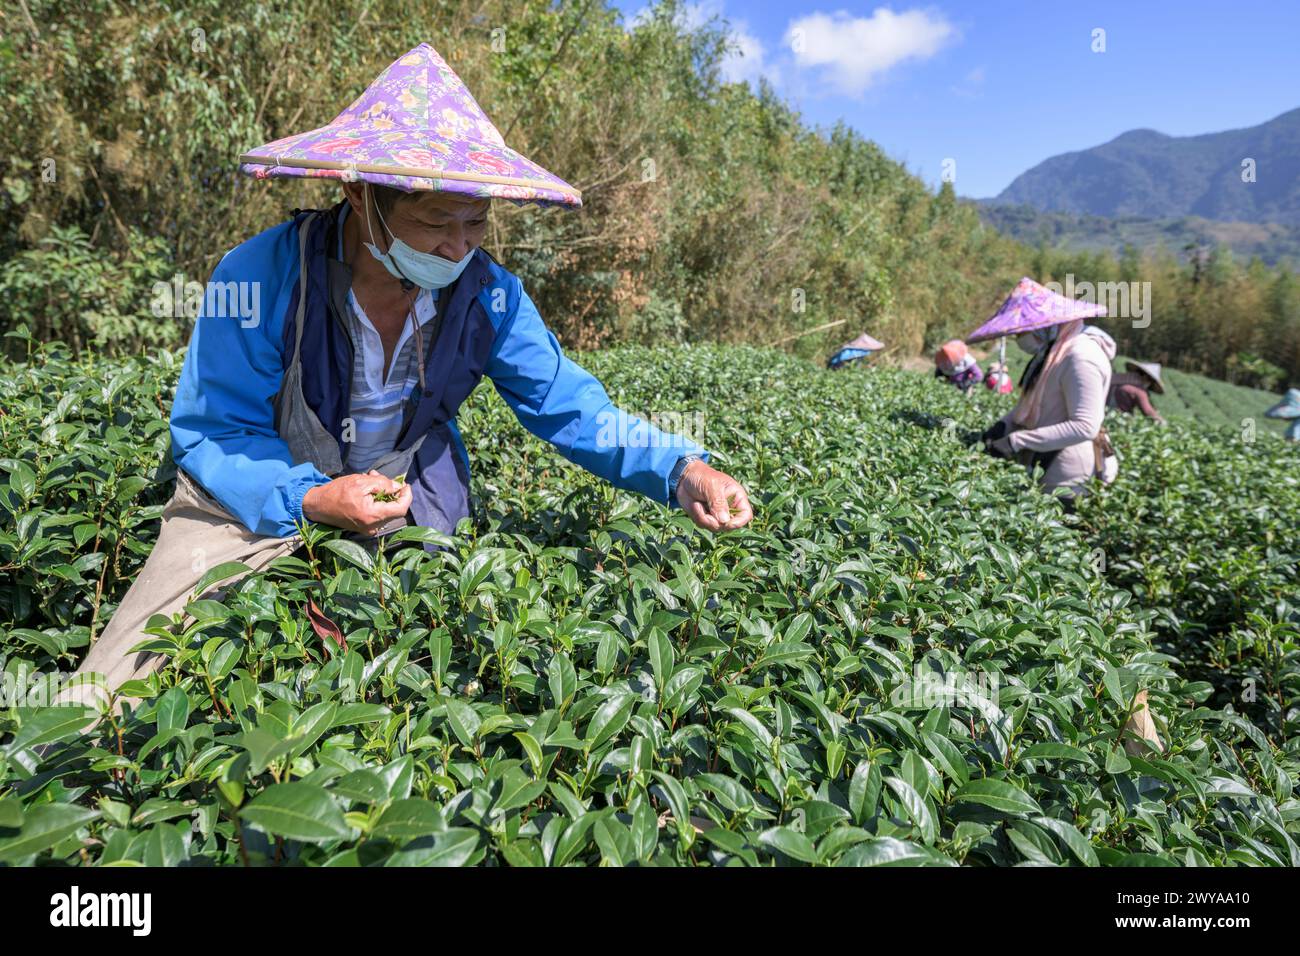 A middle age tea picker in traditional attire harvesting leaves in a sprawling tea plantation Stock Photo